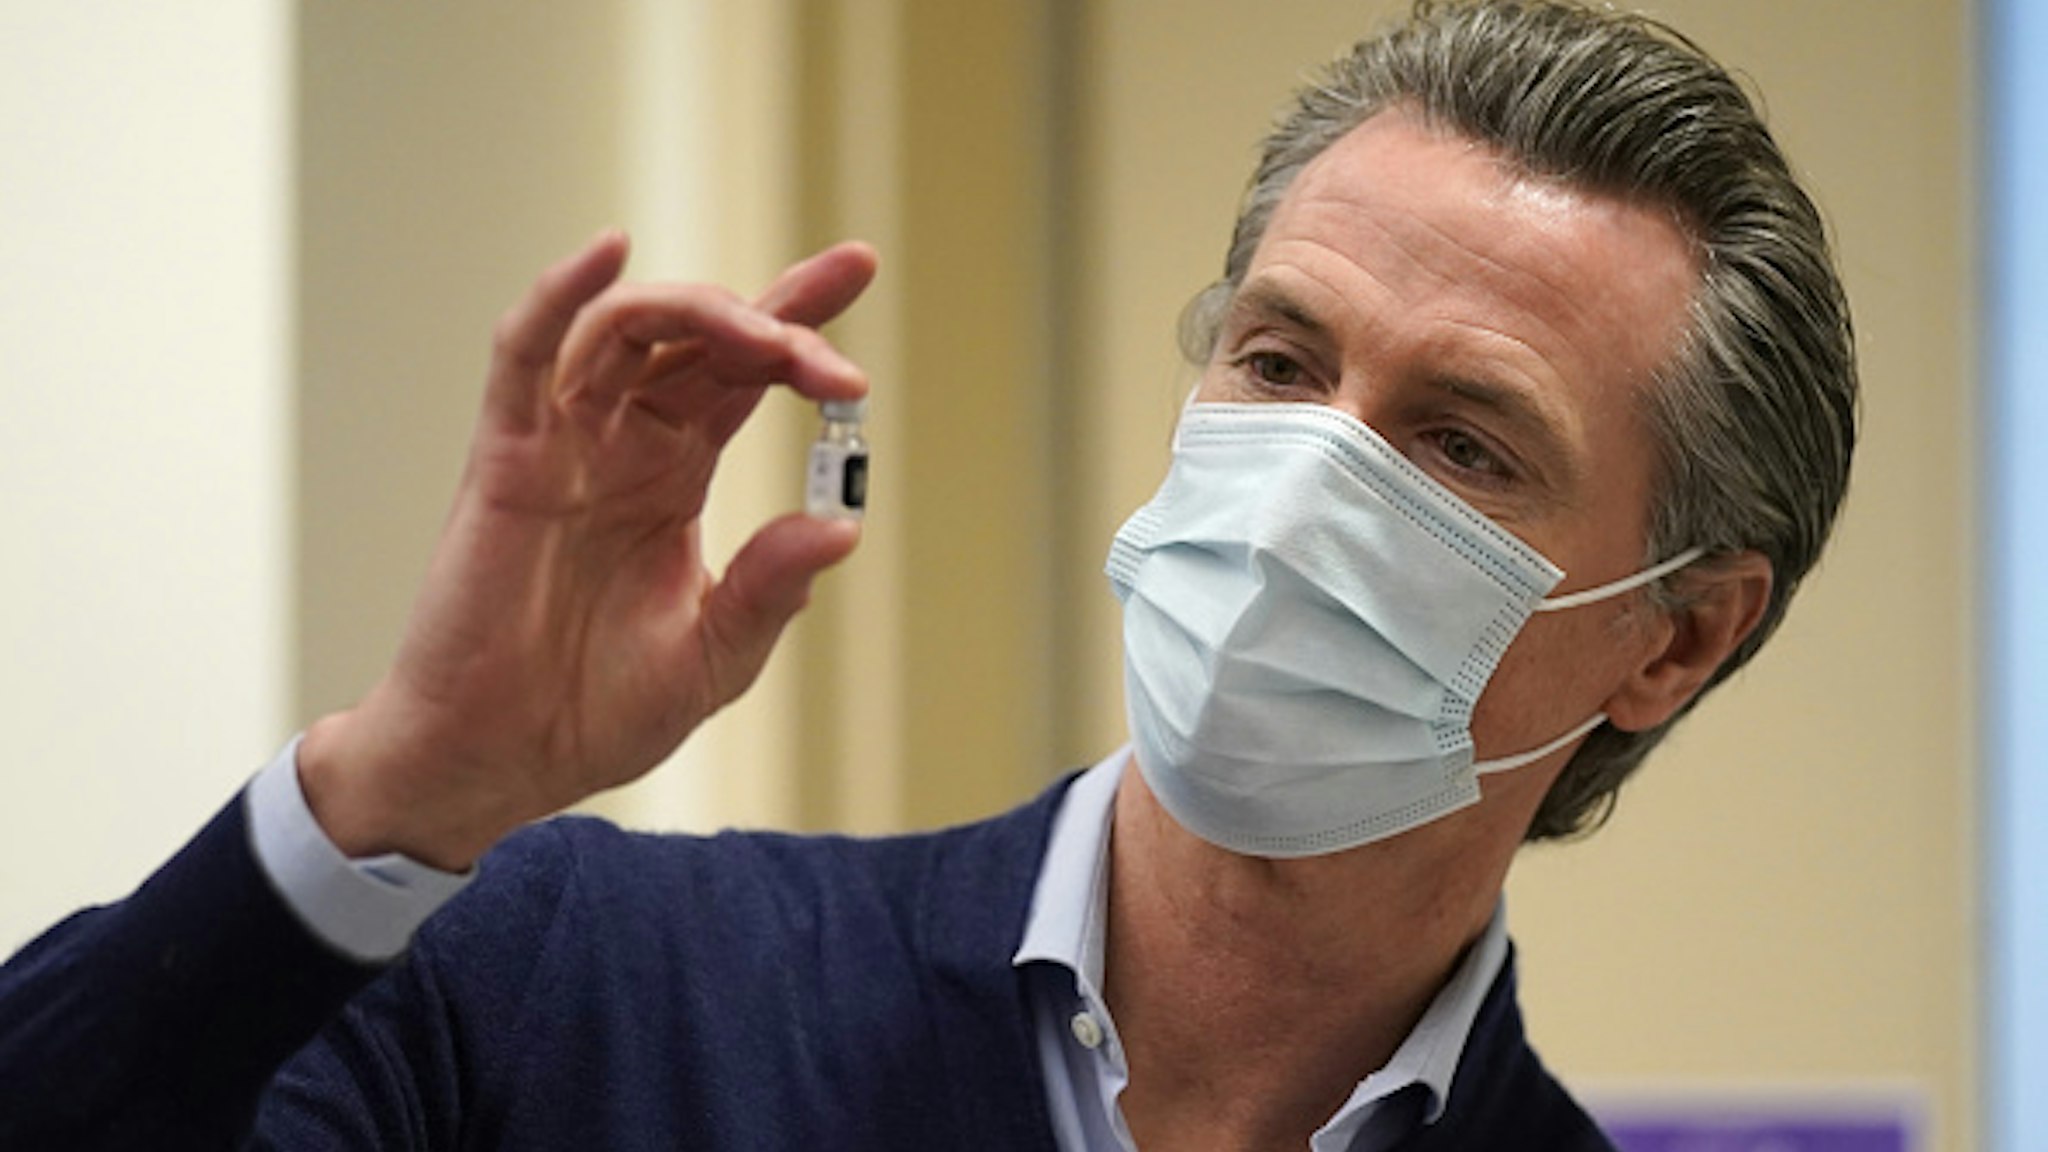 Gavin Newsom, governor of California, holds a vial of the Pfizer-BioNTech Covid-19 vaccine at Kaiser Permanente Los Angeles Medical Center in Los Angeles, California, U.S., on Monday, Dec. 14, 2020. The first Covid-19 vaccine shots were administered by U.S. hospitals Monday, the initial step in a historic drive to immunize millions of people as deaths approach the 300,000 mark.